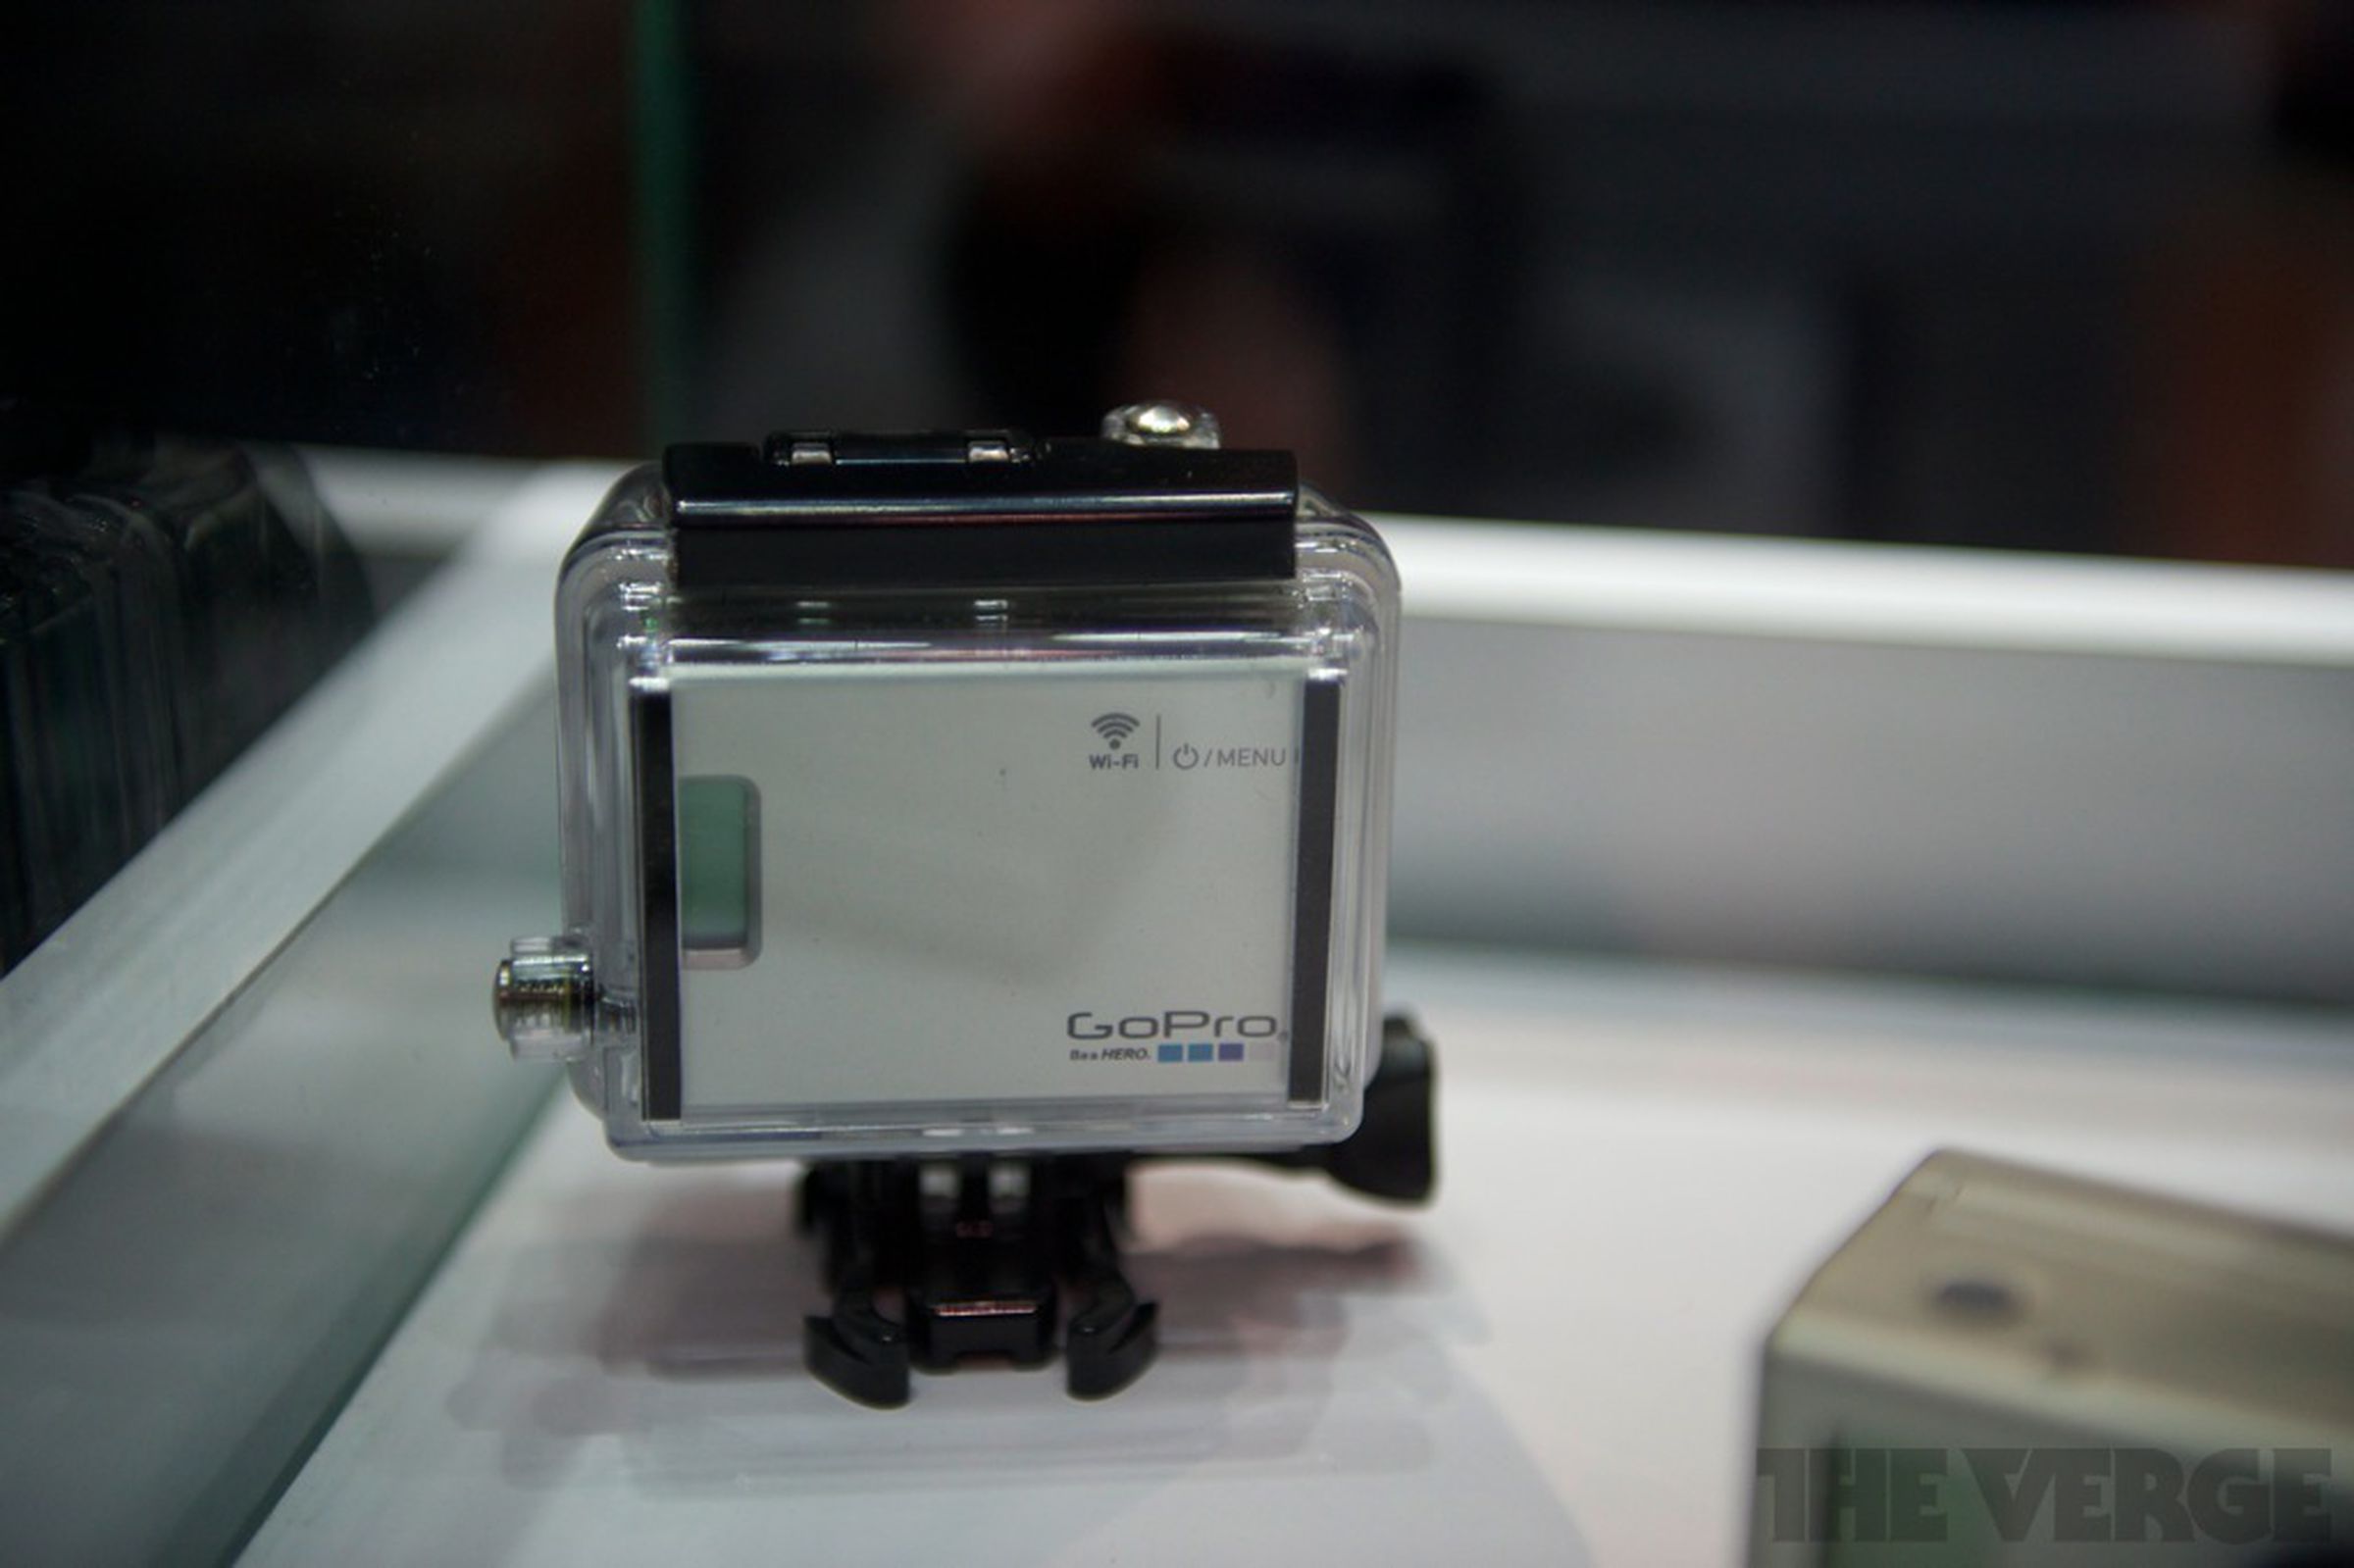 GoPro Wi-Fi BacPac hands-on pictures